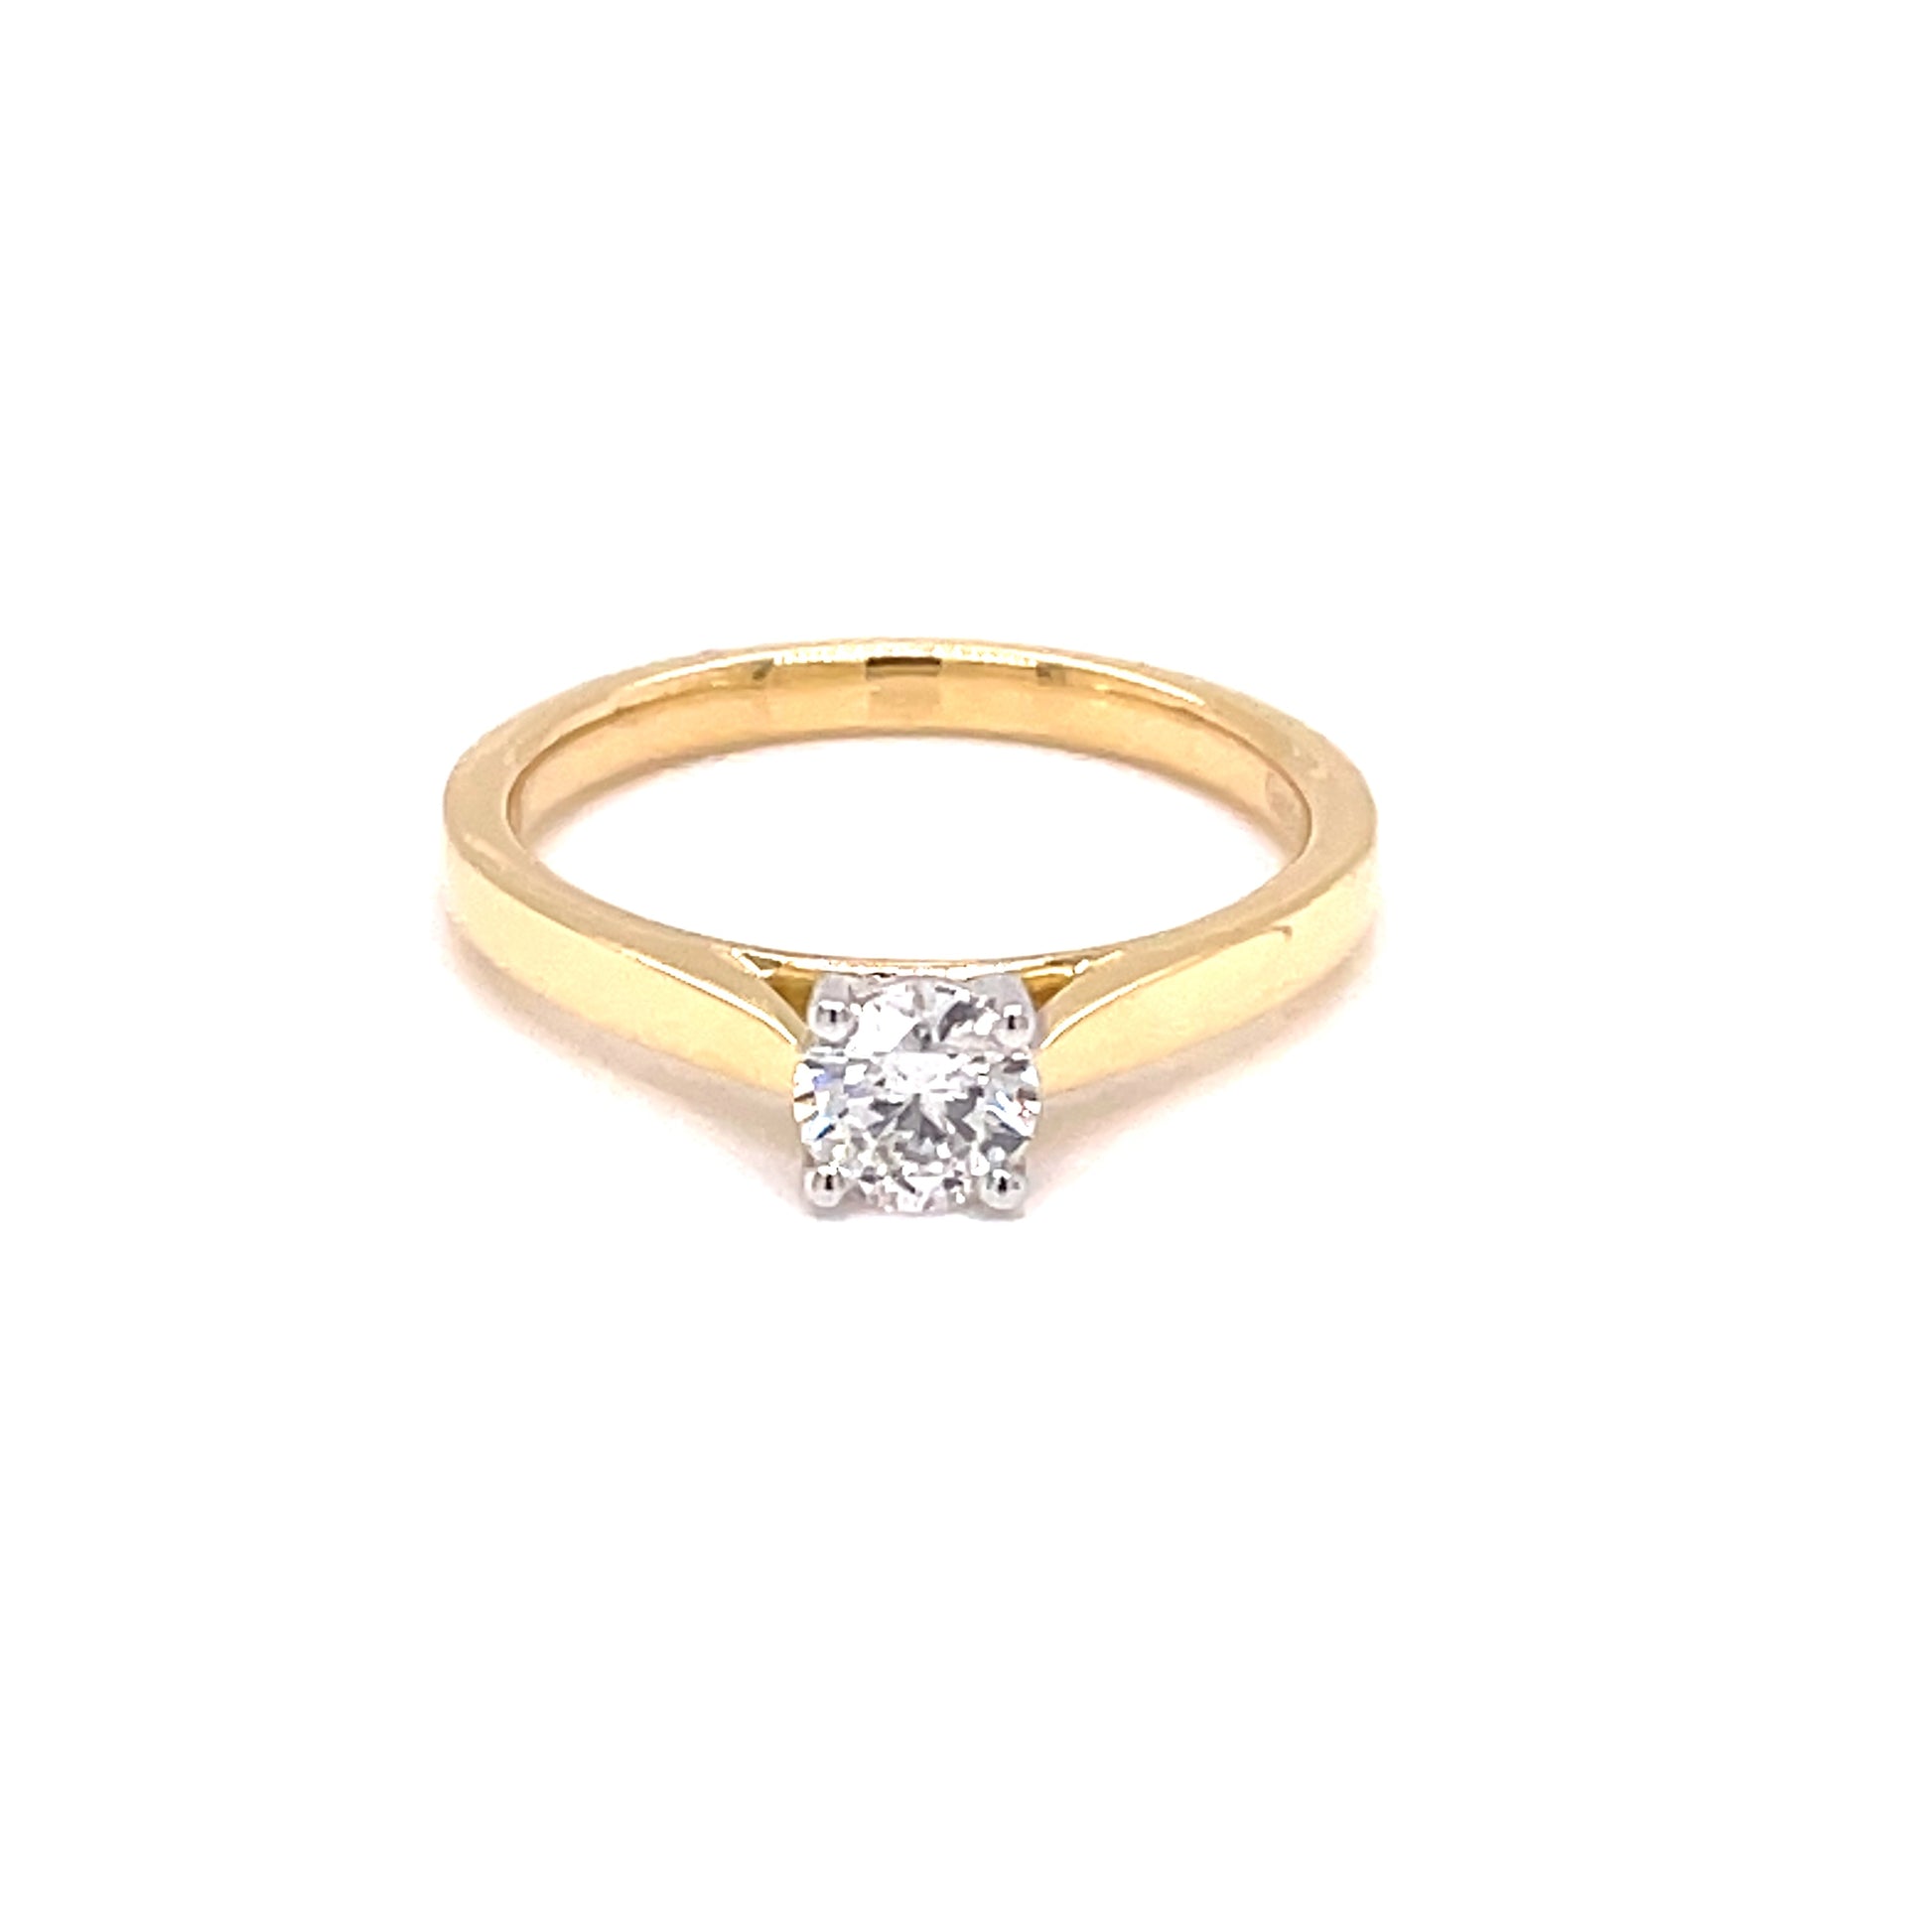 Round Brilliant Cut Diamond Solitaire Ring - 0.40cts  Gardiner Brothers   